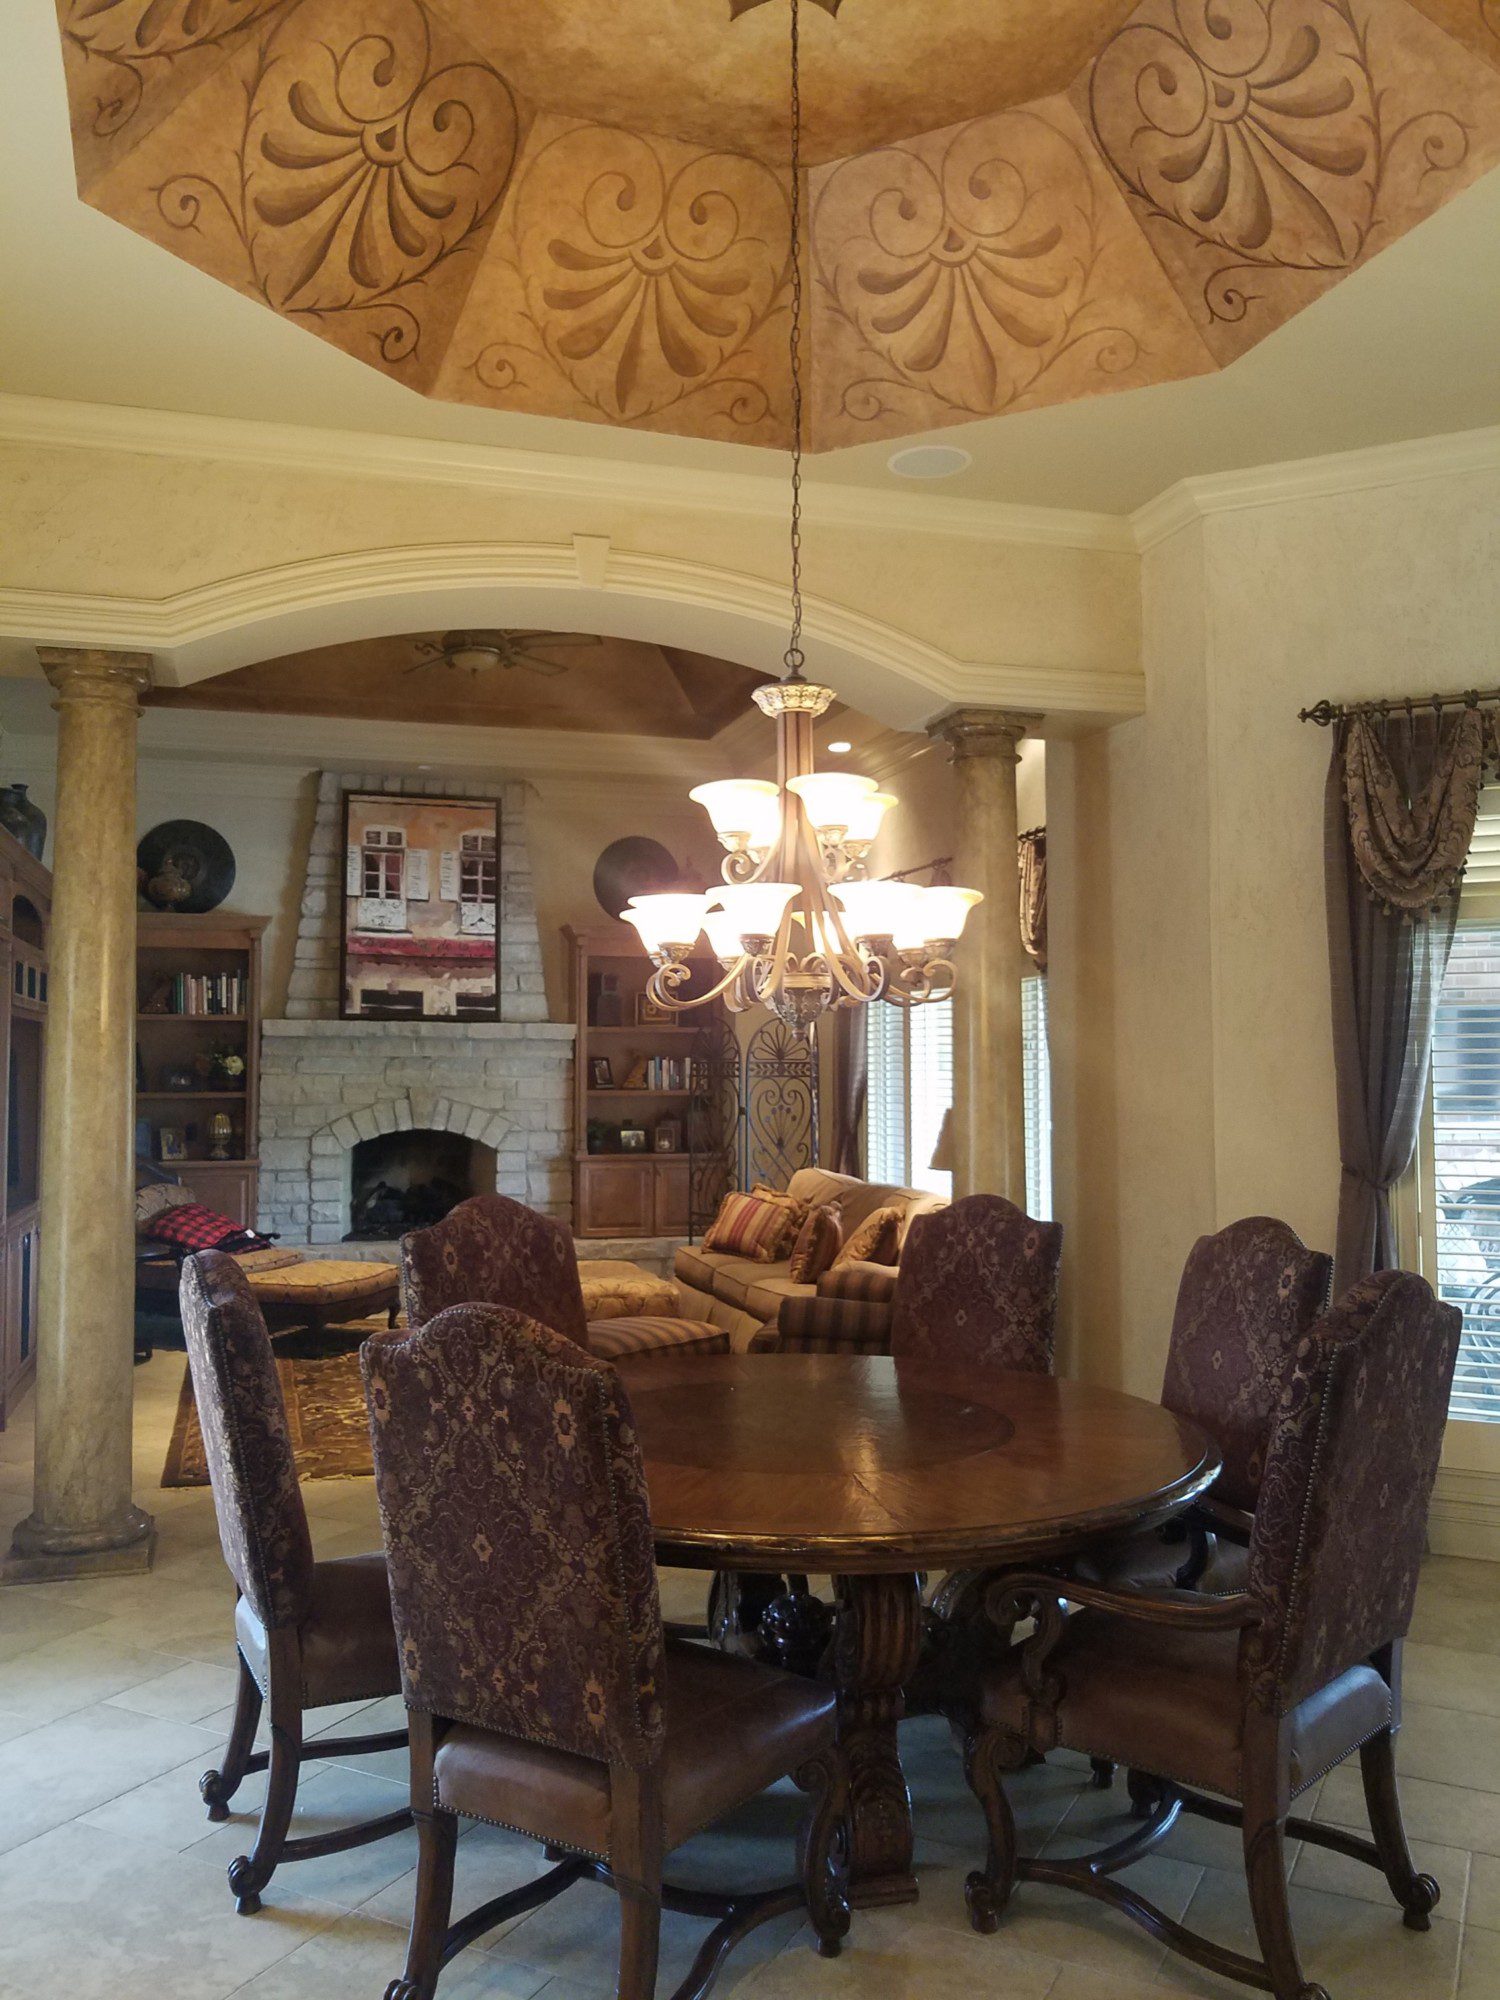 dining space with dark accents and tuscan wallpaper